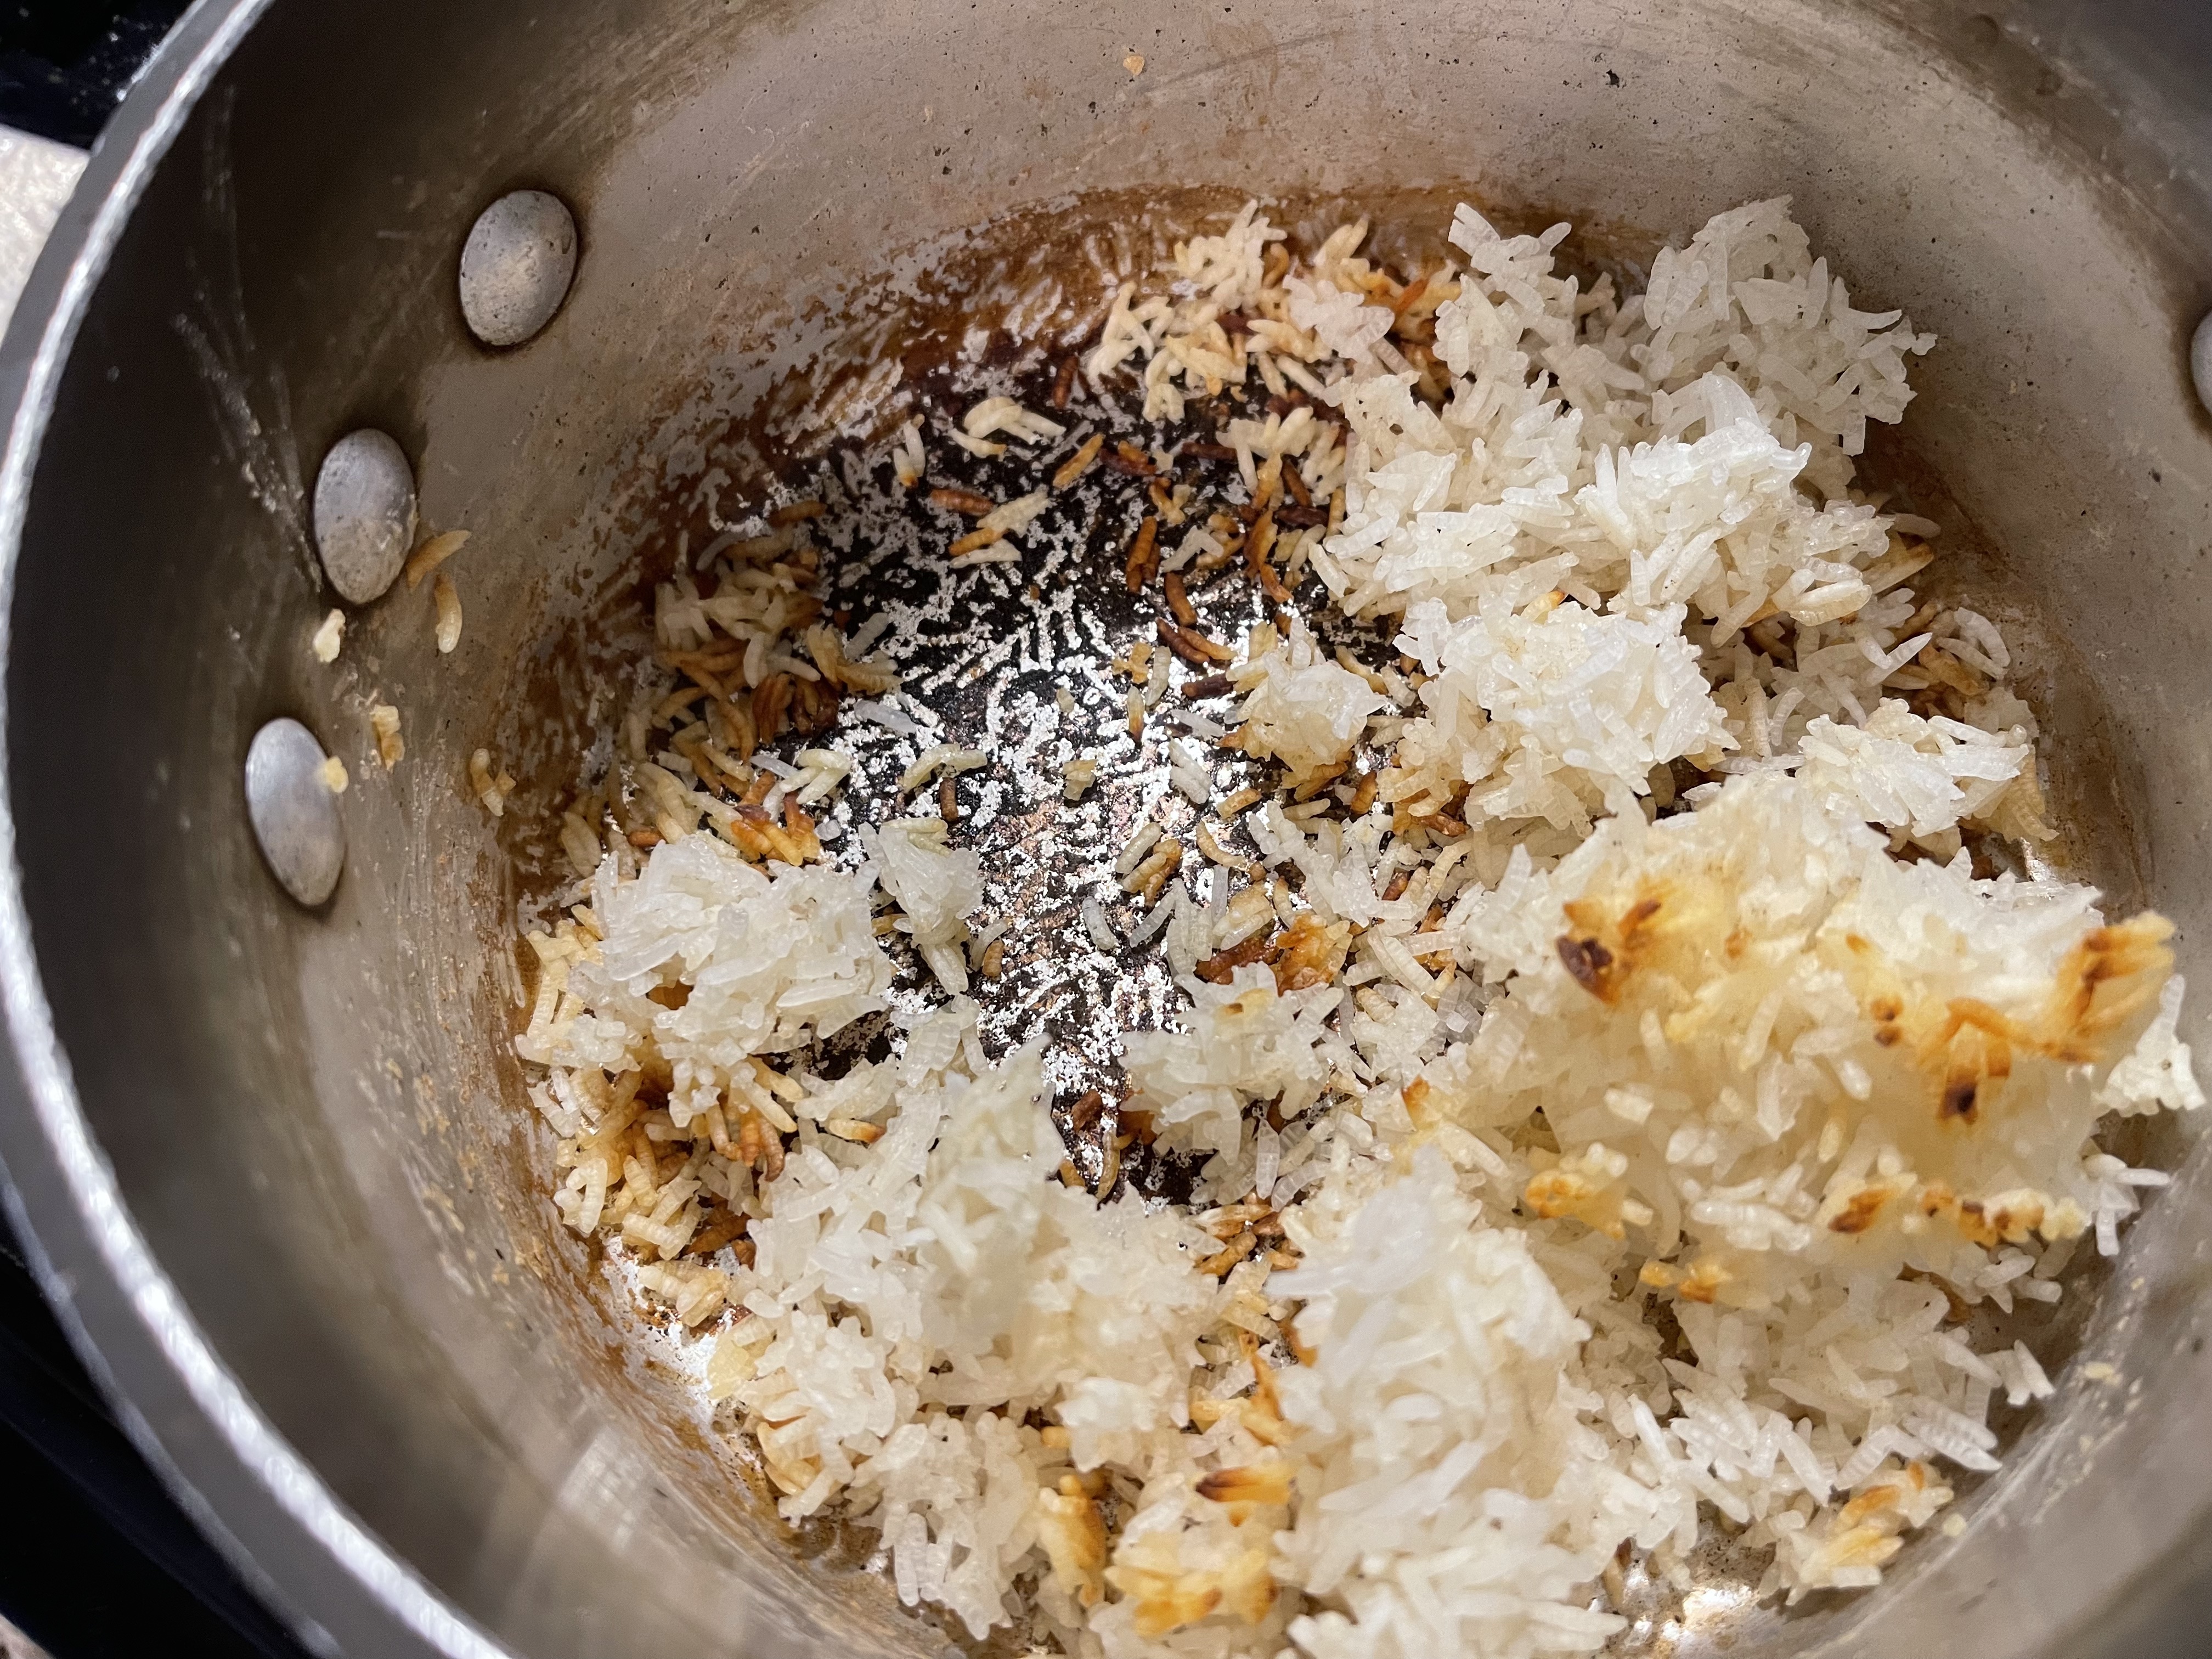 Image of a burnt pot of rice